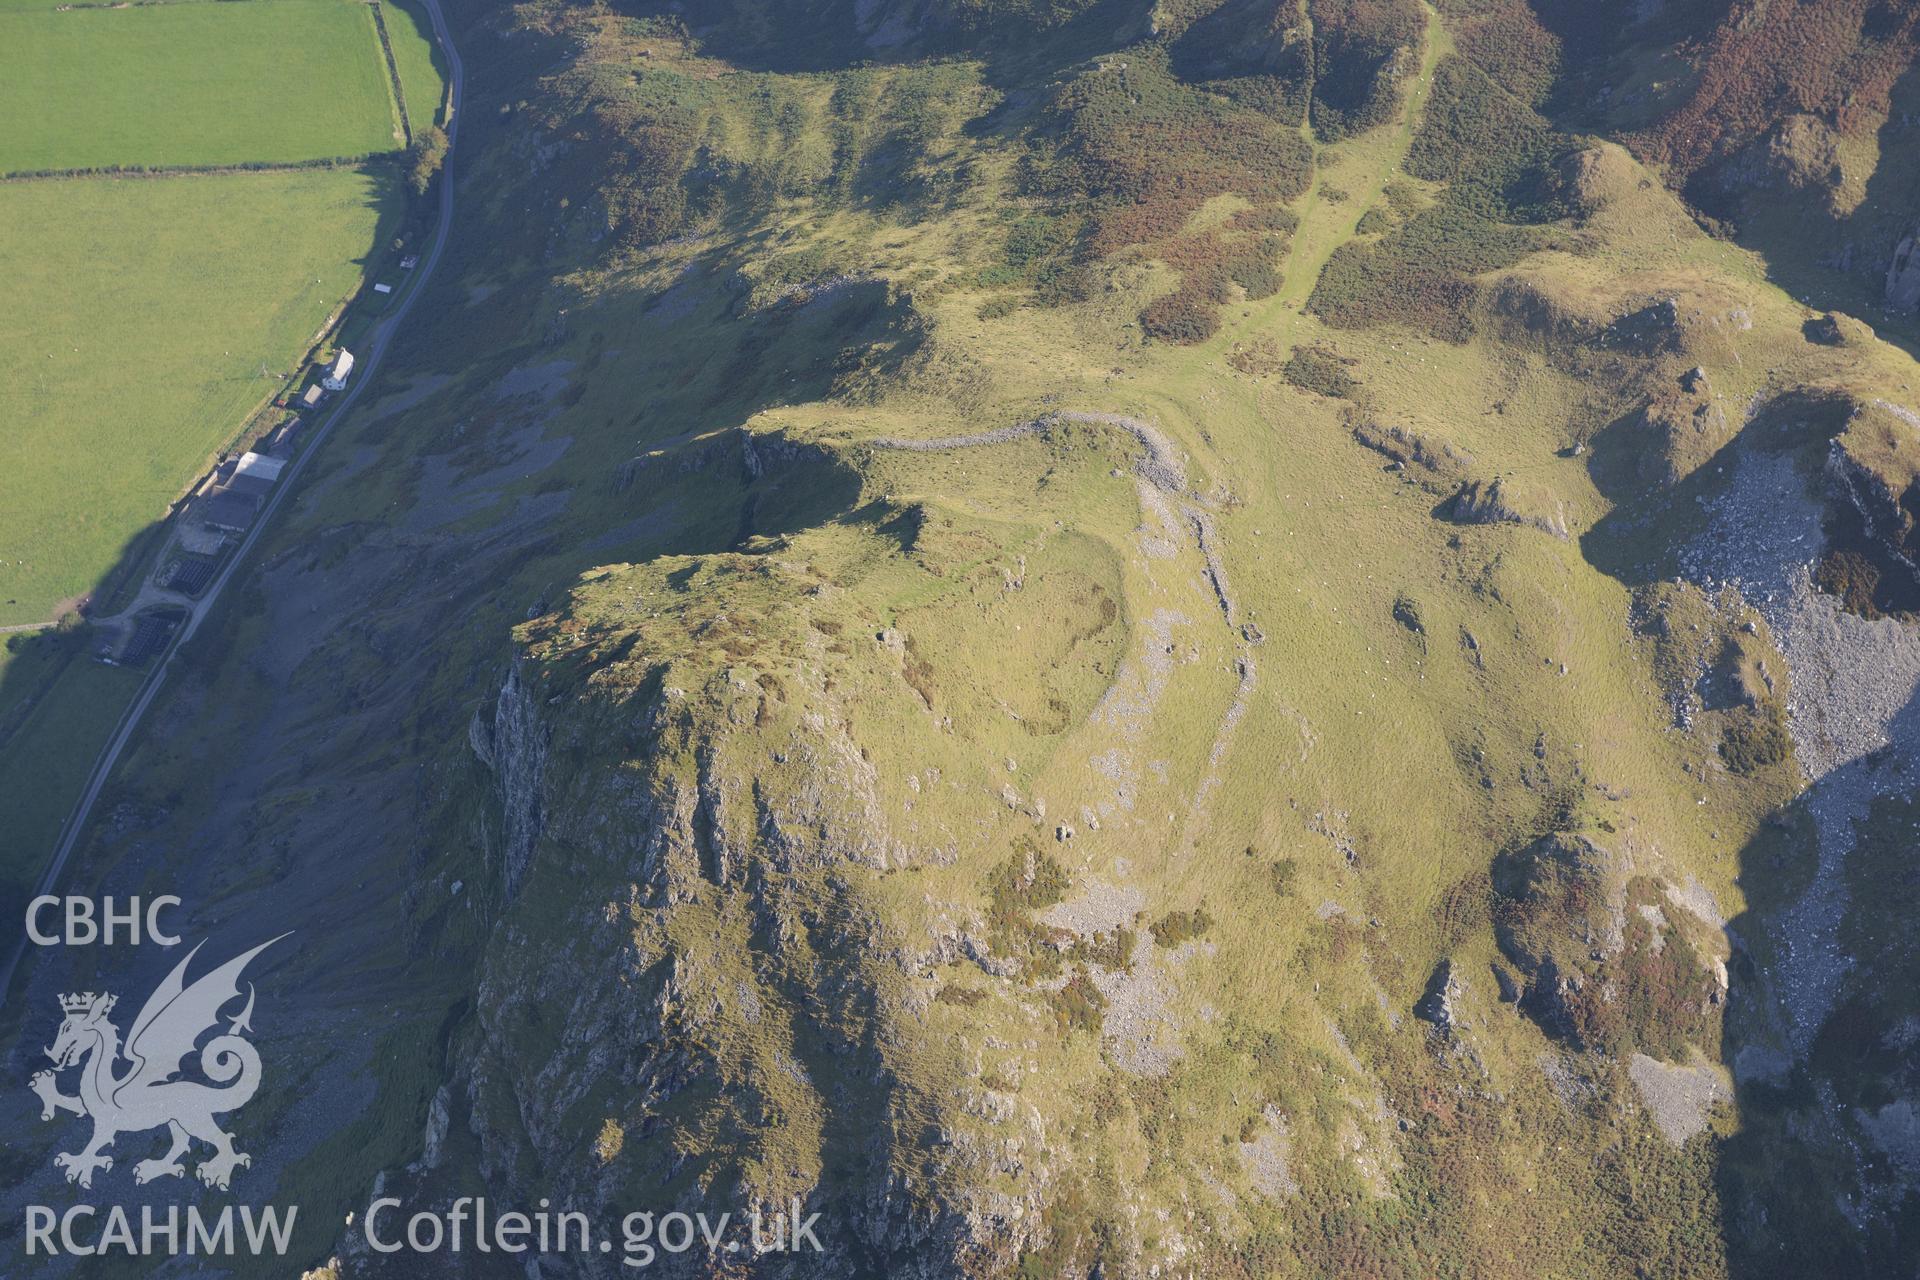 Hillfort on Bird's Rock, near Abergynolwyn. Oblique aerial photograph taken during the Royal Commission's programme of archaeological aerial reconnaissance by Toby Driver on 2nd October 2015.